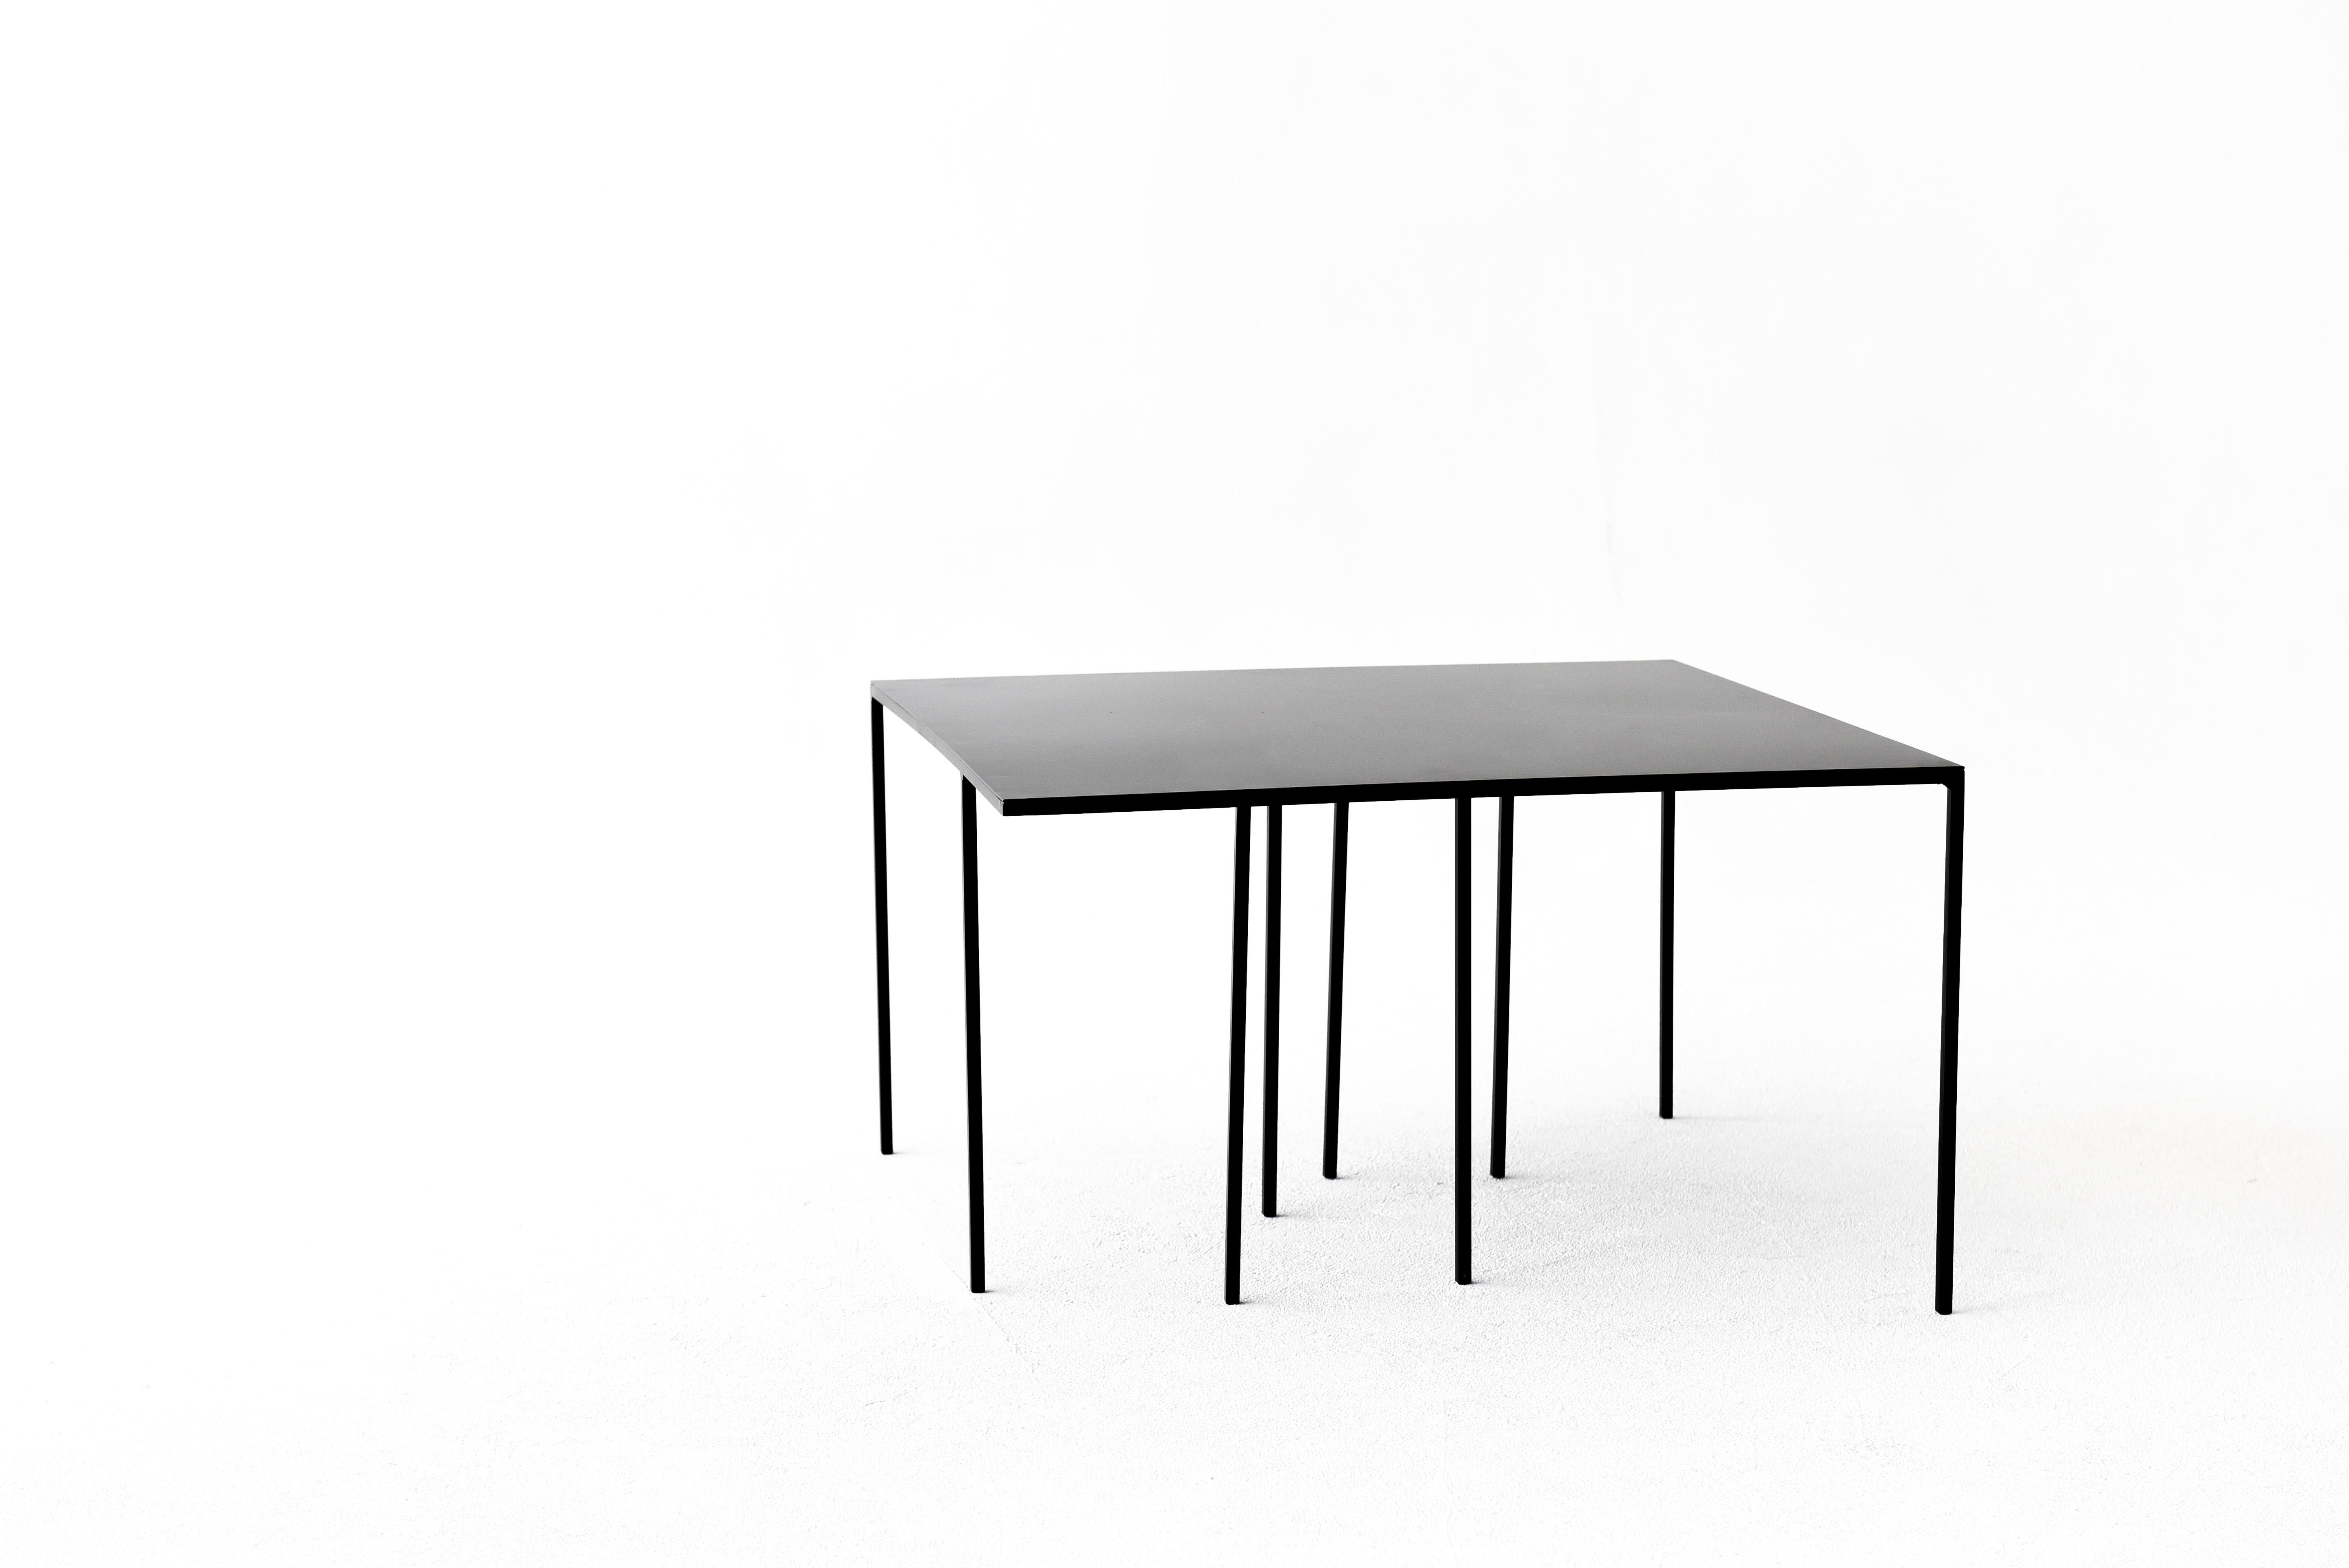 Object 014 Center Table by NG Design
Dimensions: D70 x W70 x H40 cm
Materials: Powder coated steel.

Also Available: All of objects available in different materials and colors on demand.

The 